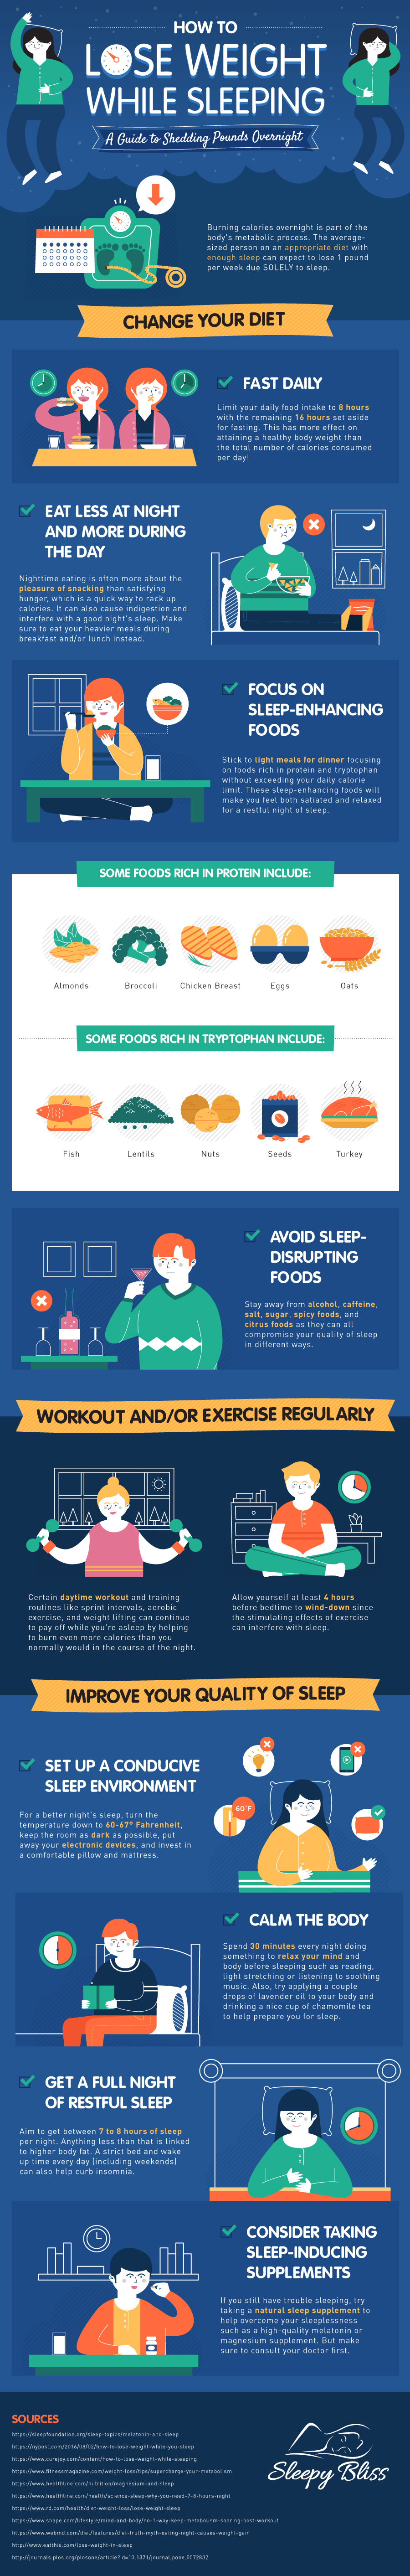 Infographic for How to Lose Weight While Sleeping